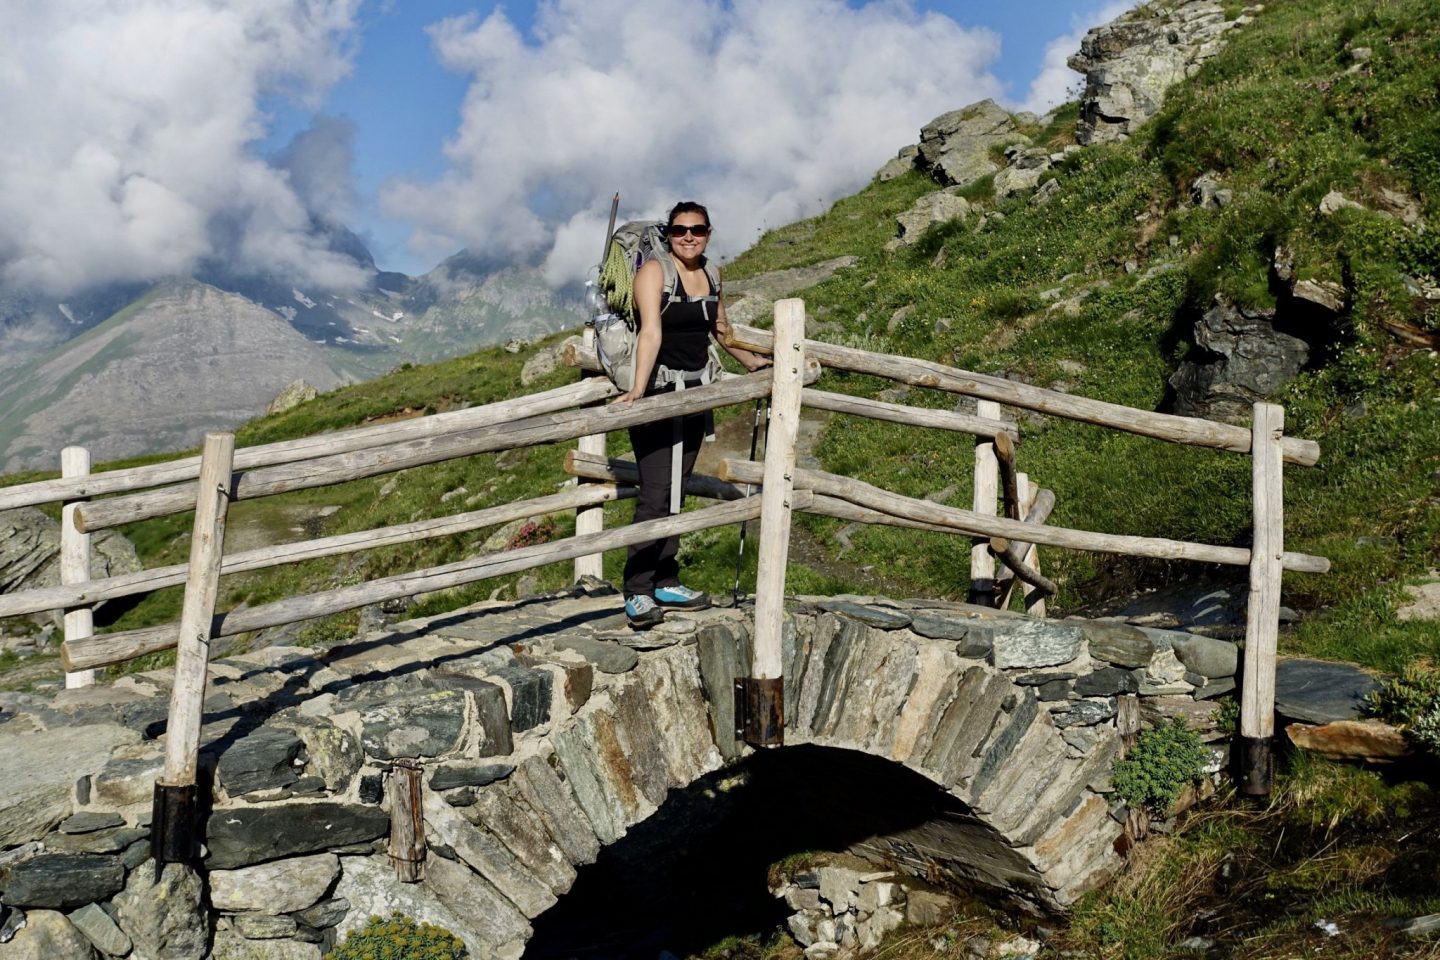 Nell on a bridge with mountains in the background wearing a back pack with ice axe and rope attached, on the spaghetti tour